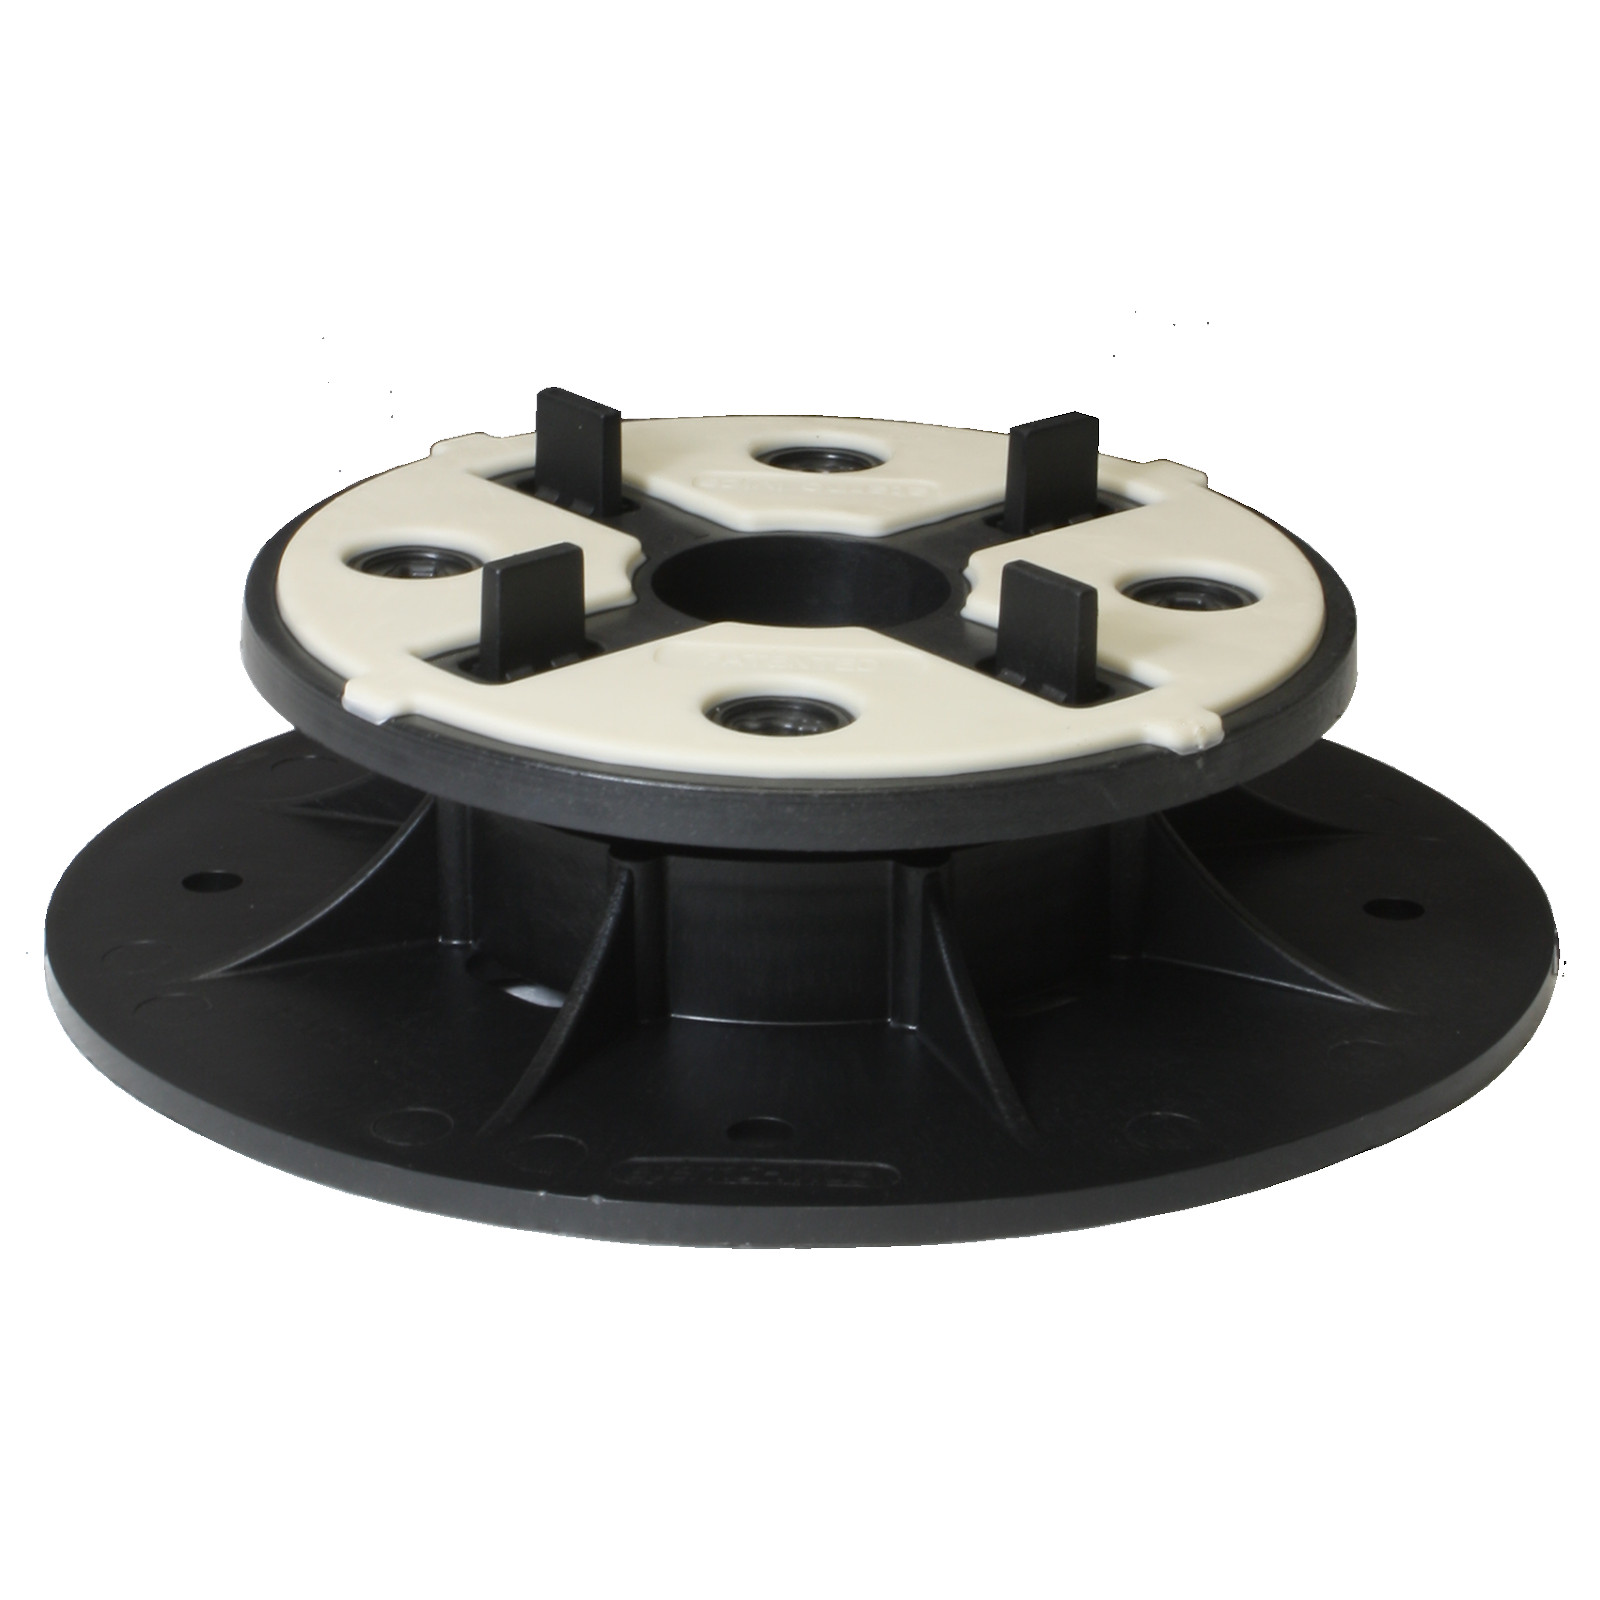 SE1 Adjustable Ped Support w/ Three-in-One Self Leveling Head 1.5” ‐ 2” (37.5‐50Mm)